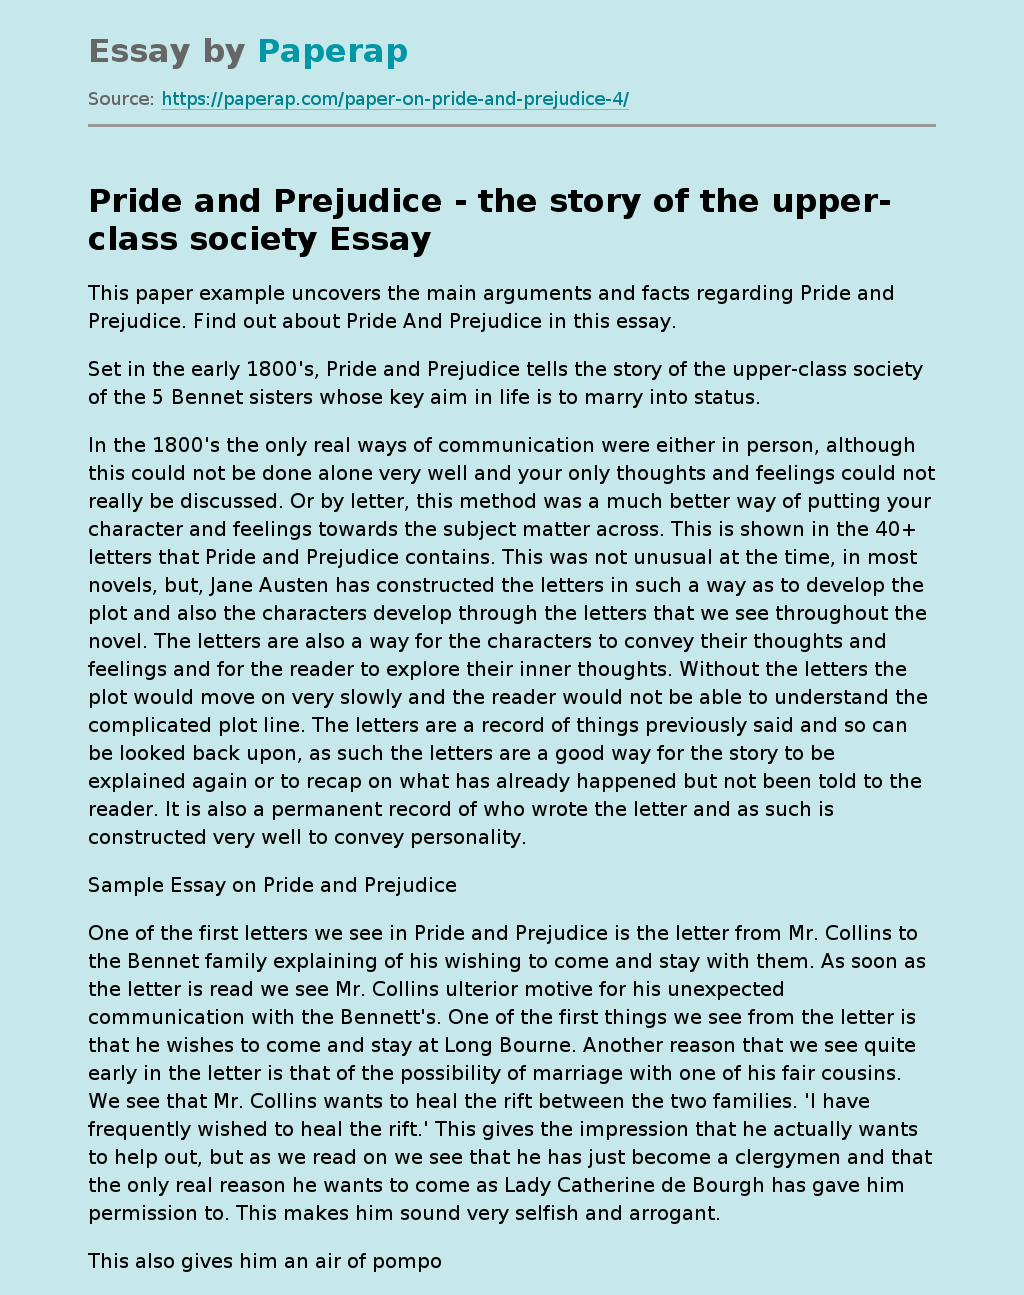 “Pride and Prejudice” - The Story of the Upper-Class Society